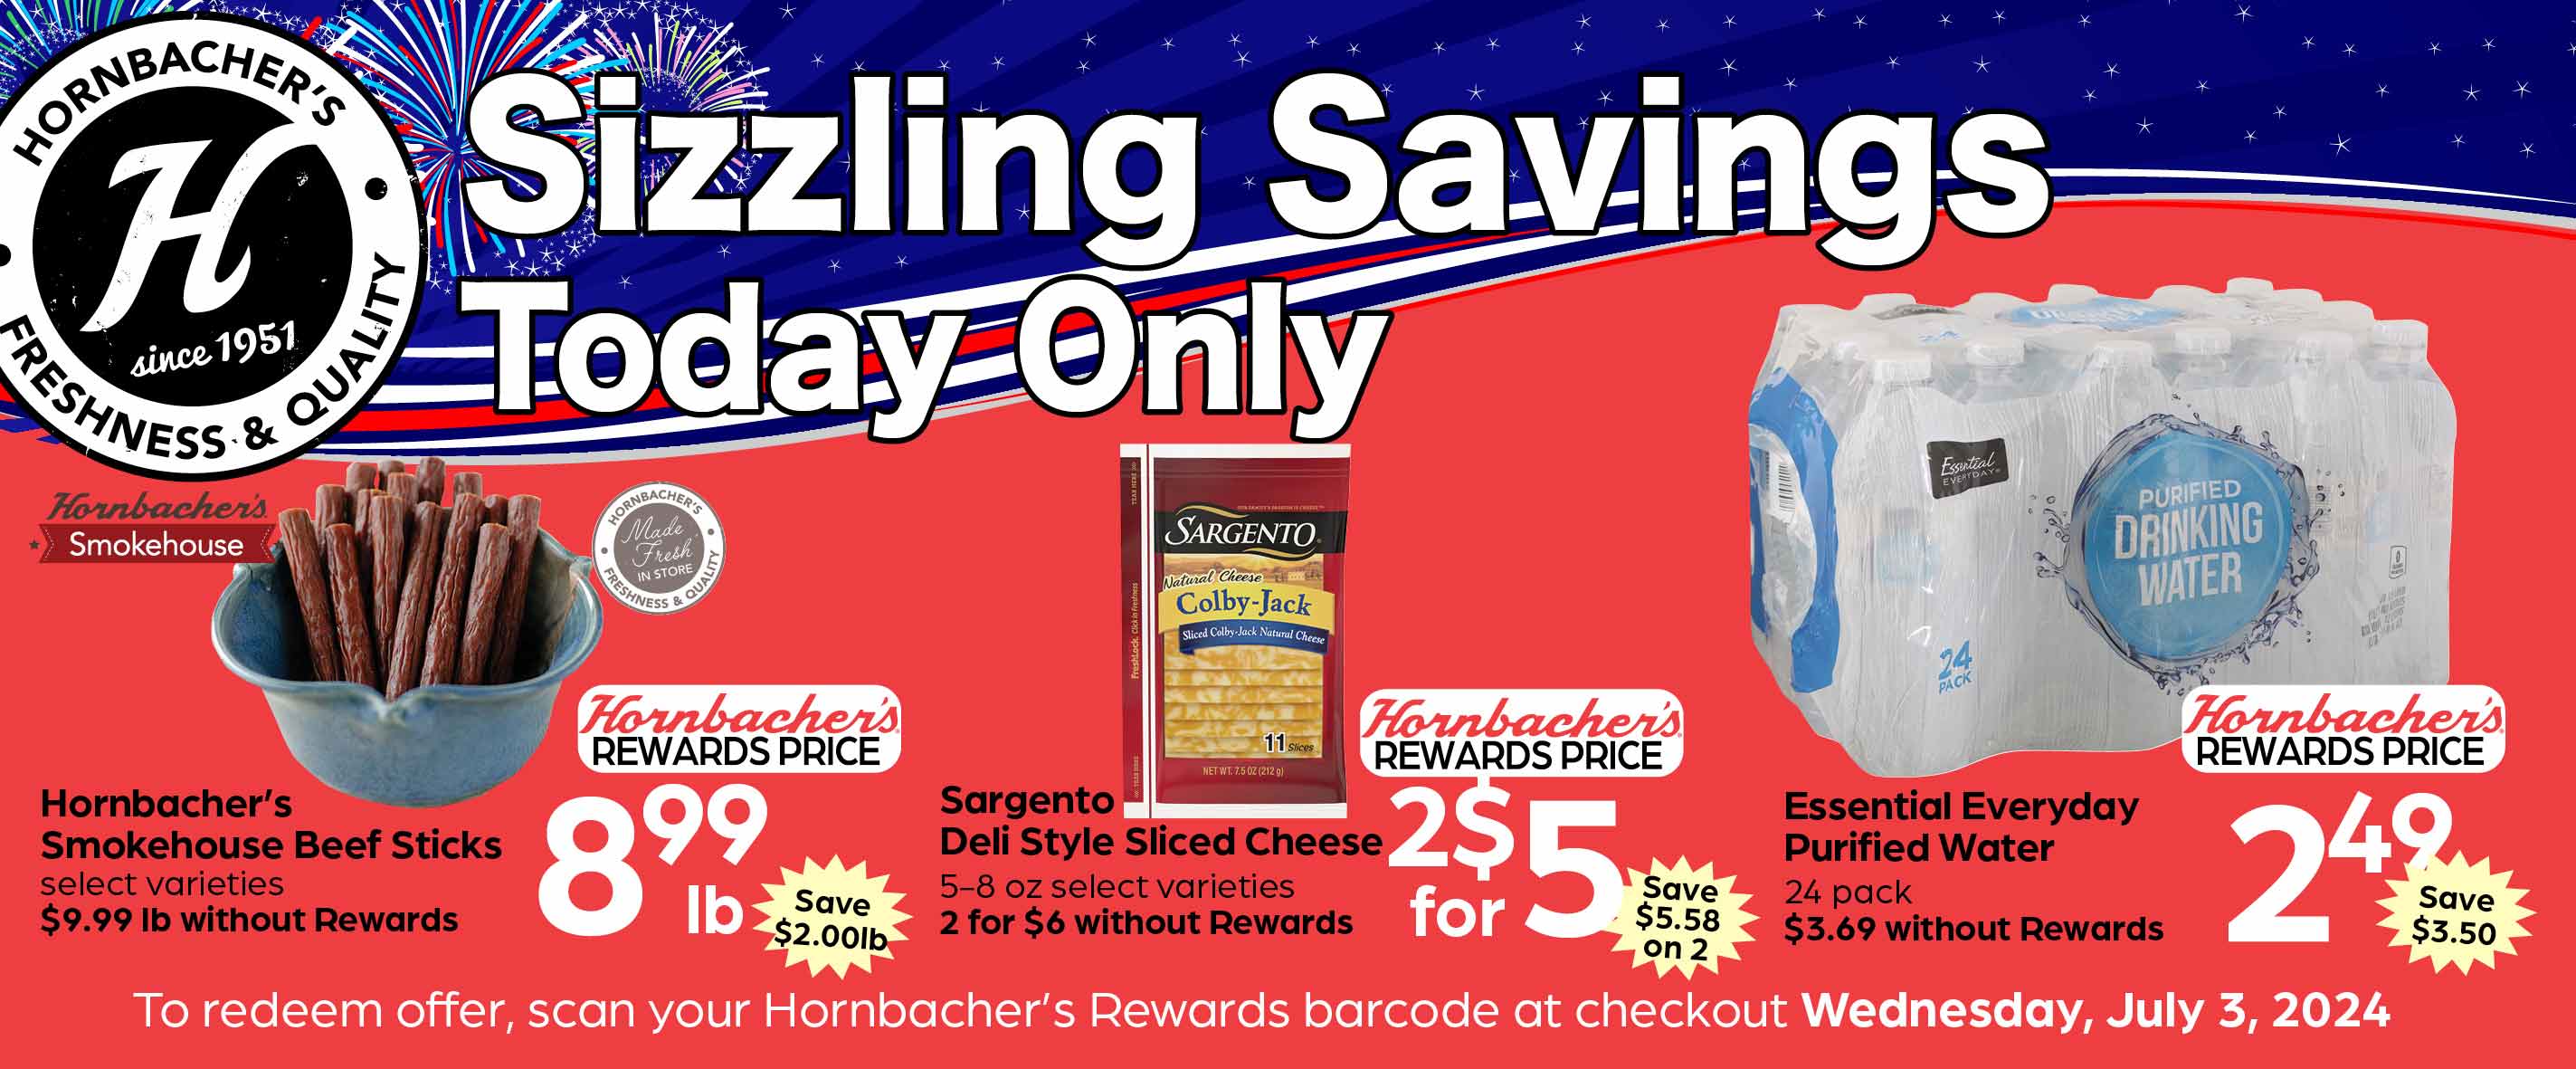 Sizzling Savings - Today Only!